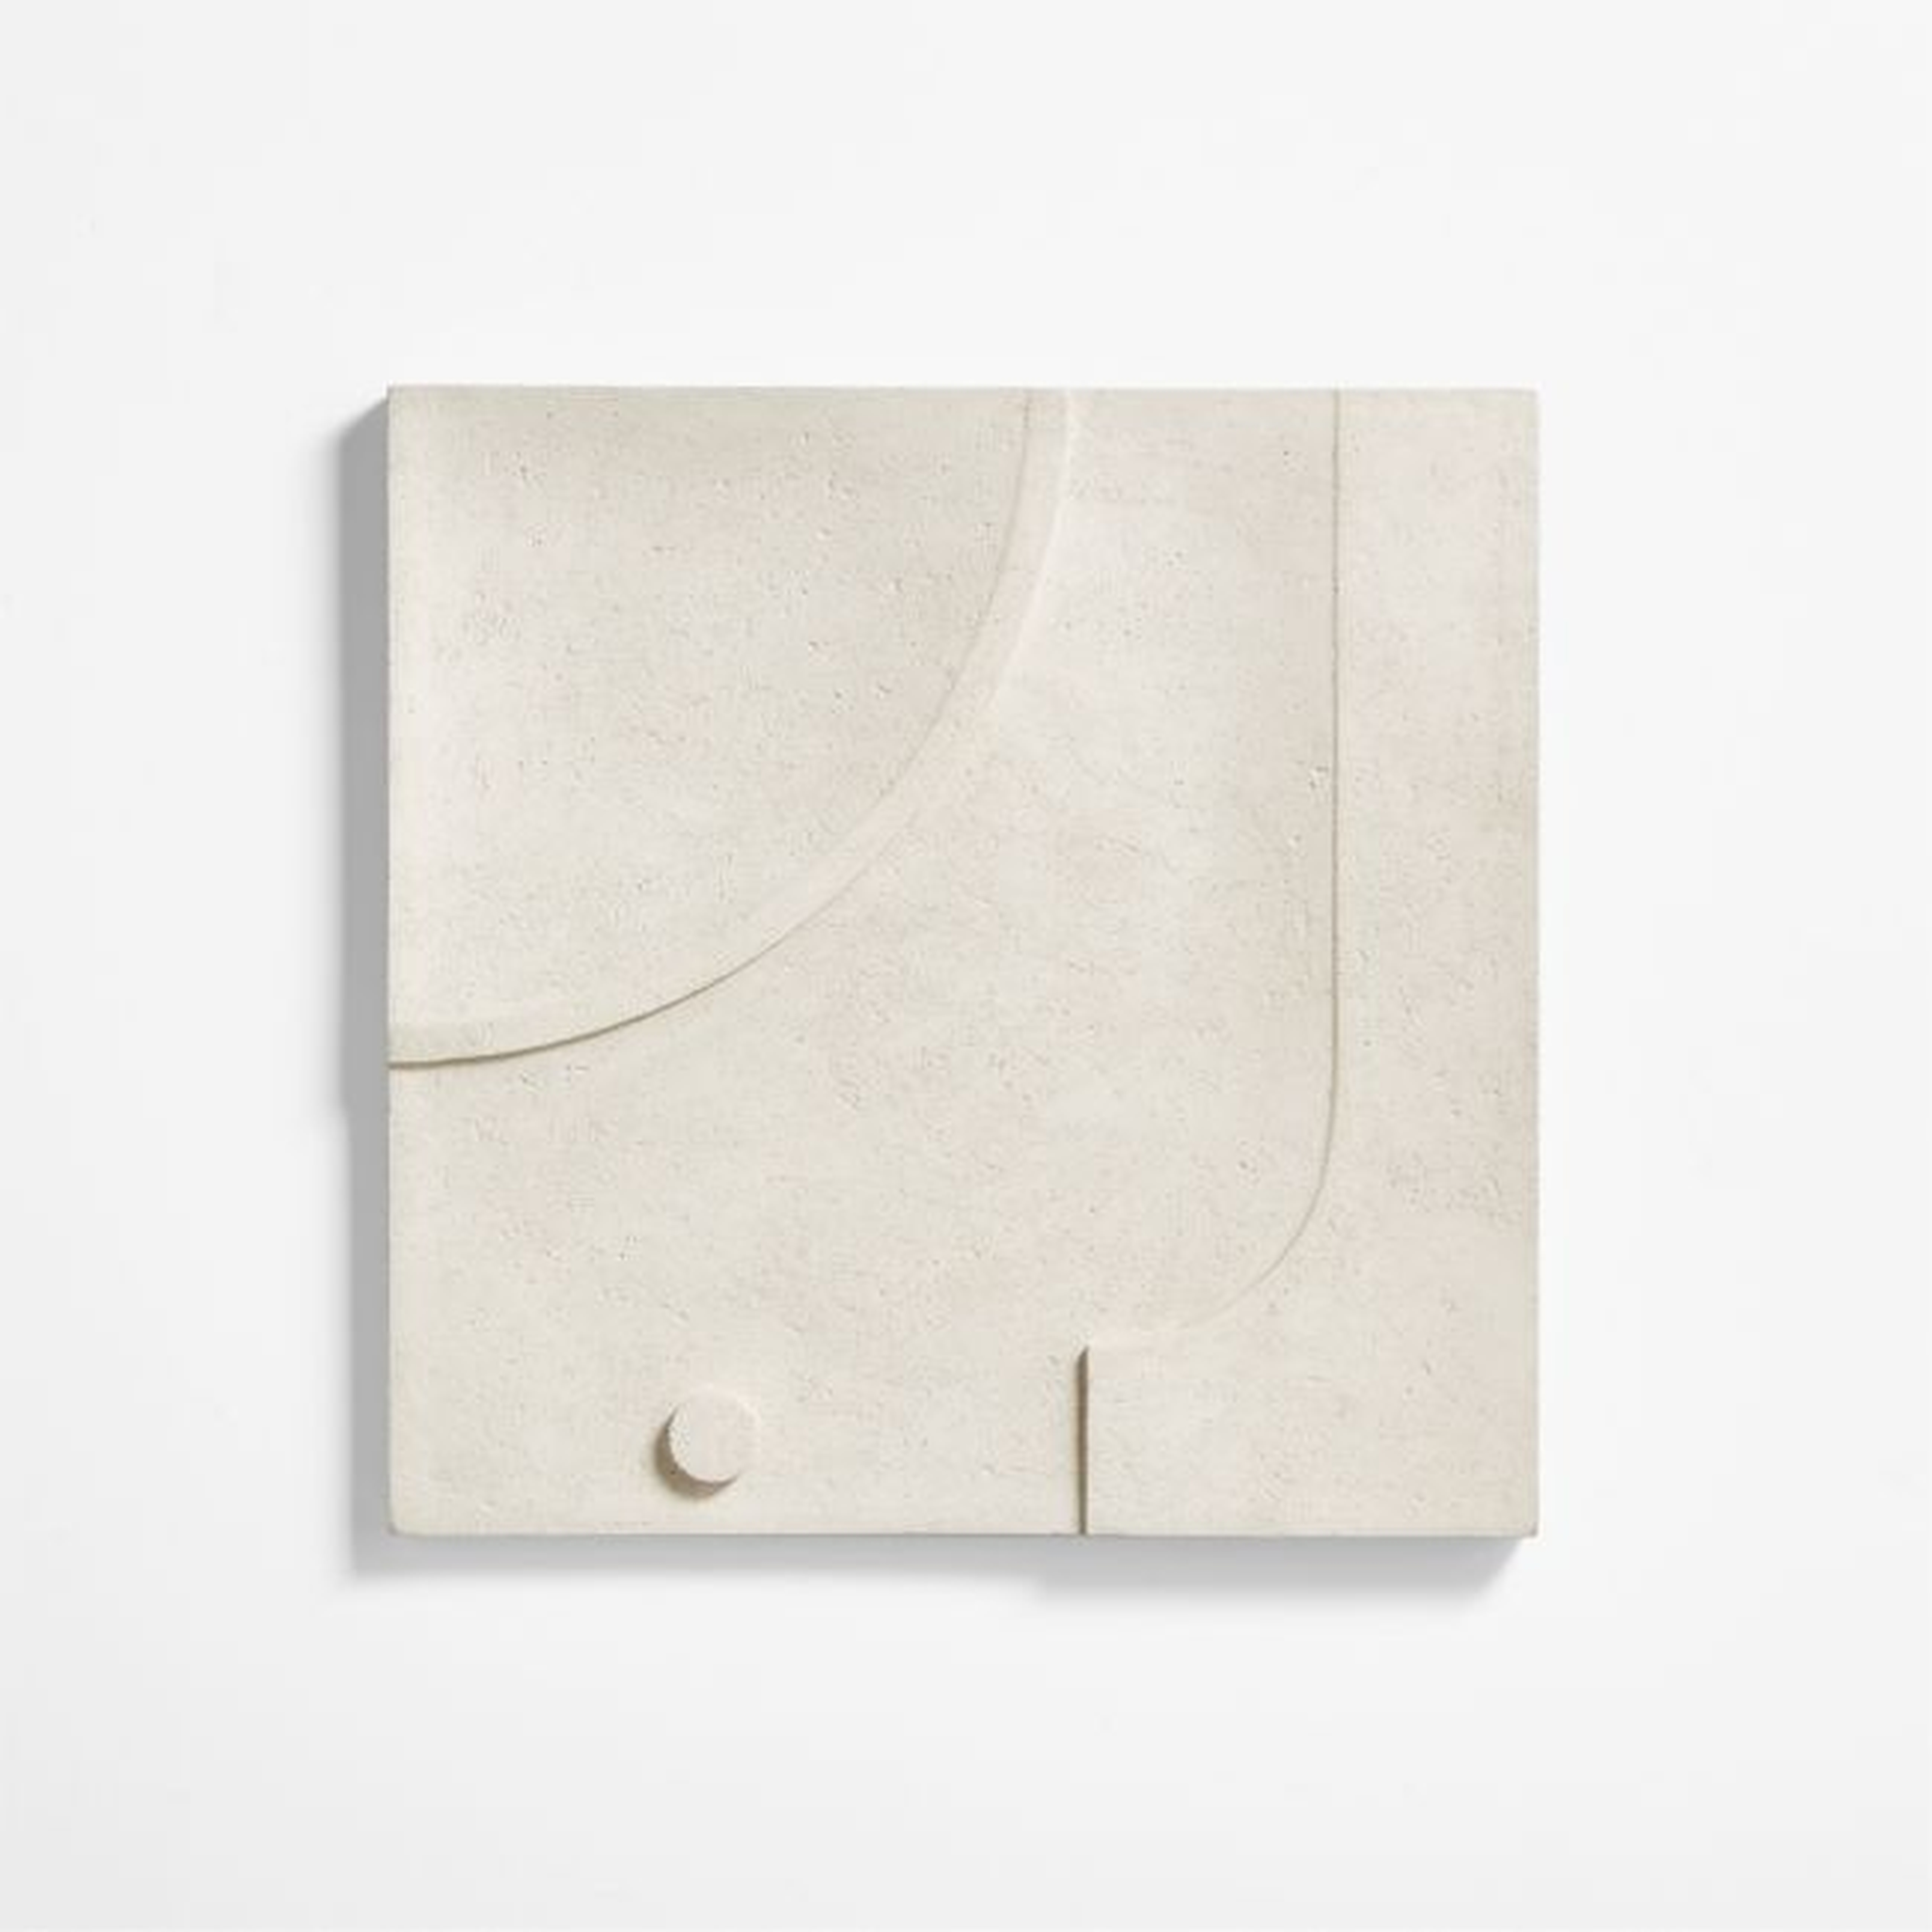 'Taso 24' Hand-Carved White Tile Wall Decor 24"x1.5" - Crate and Barrel